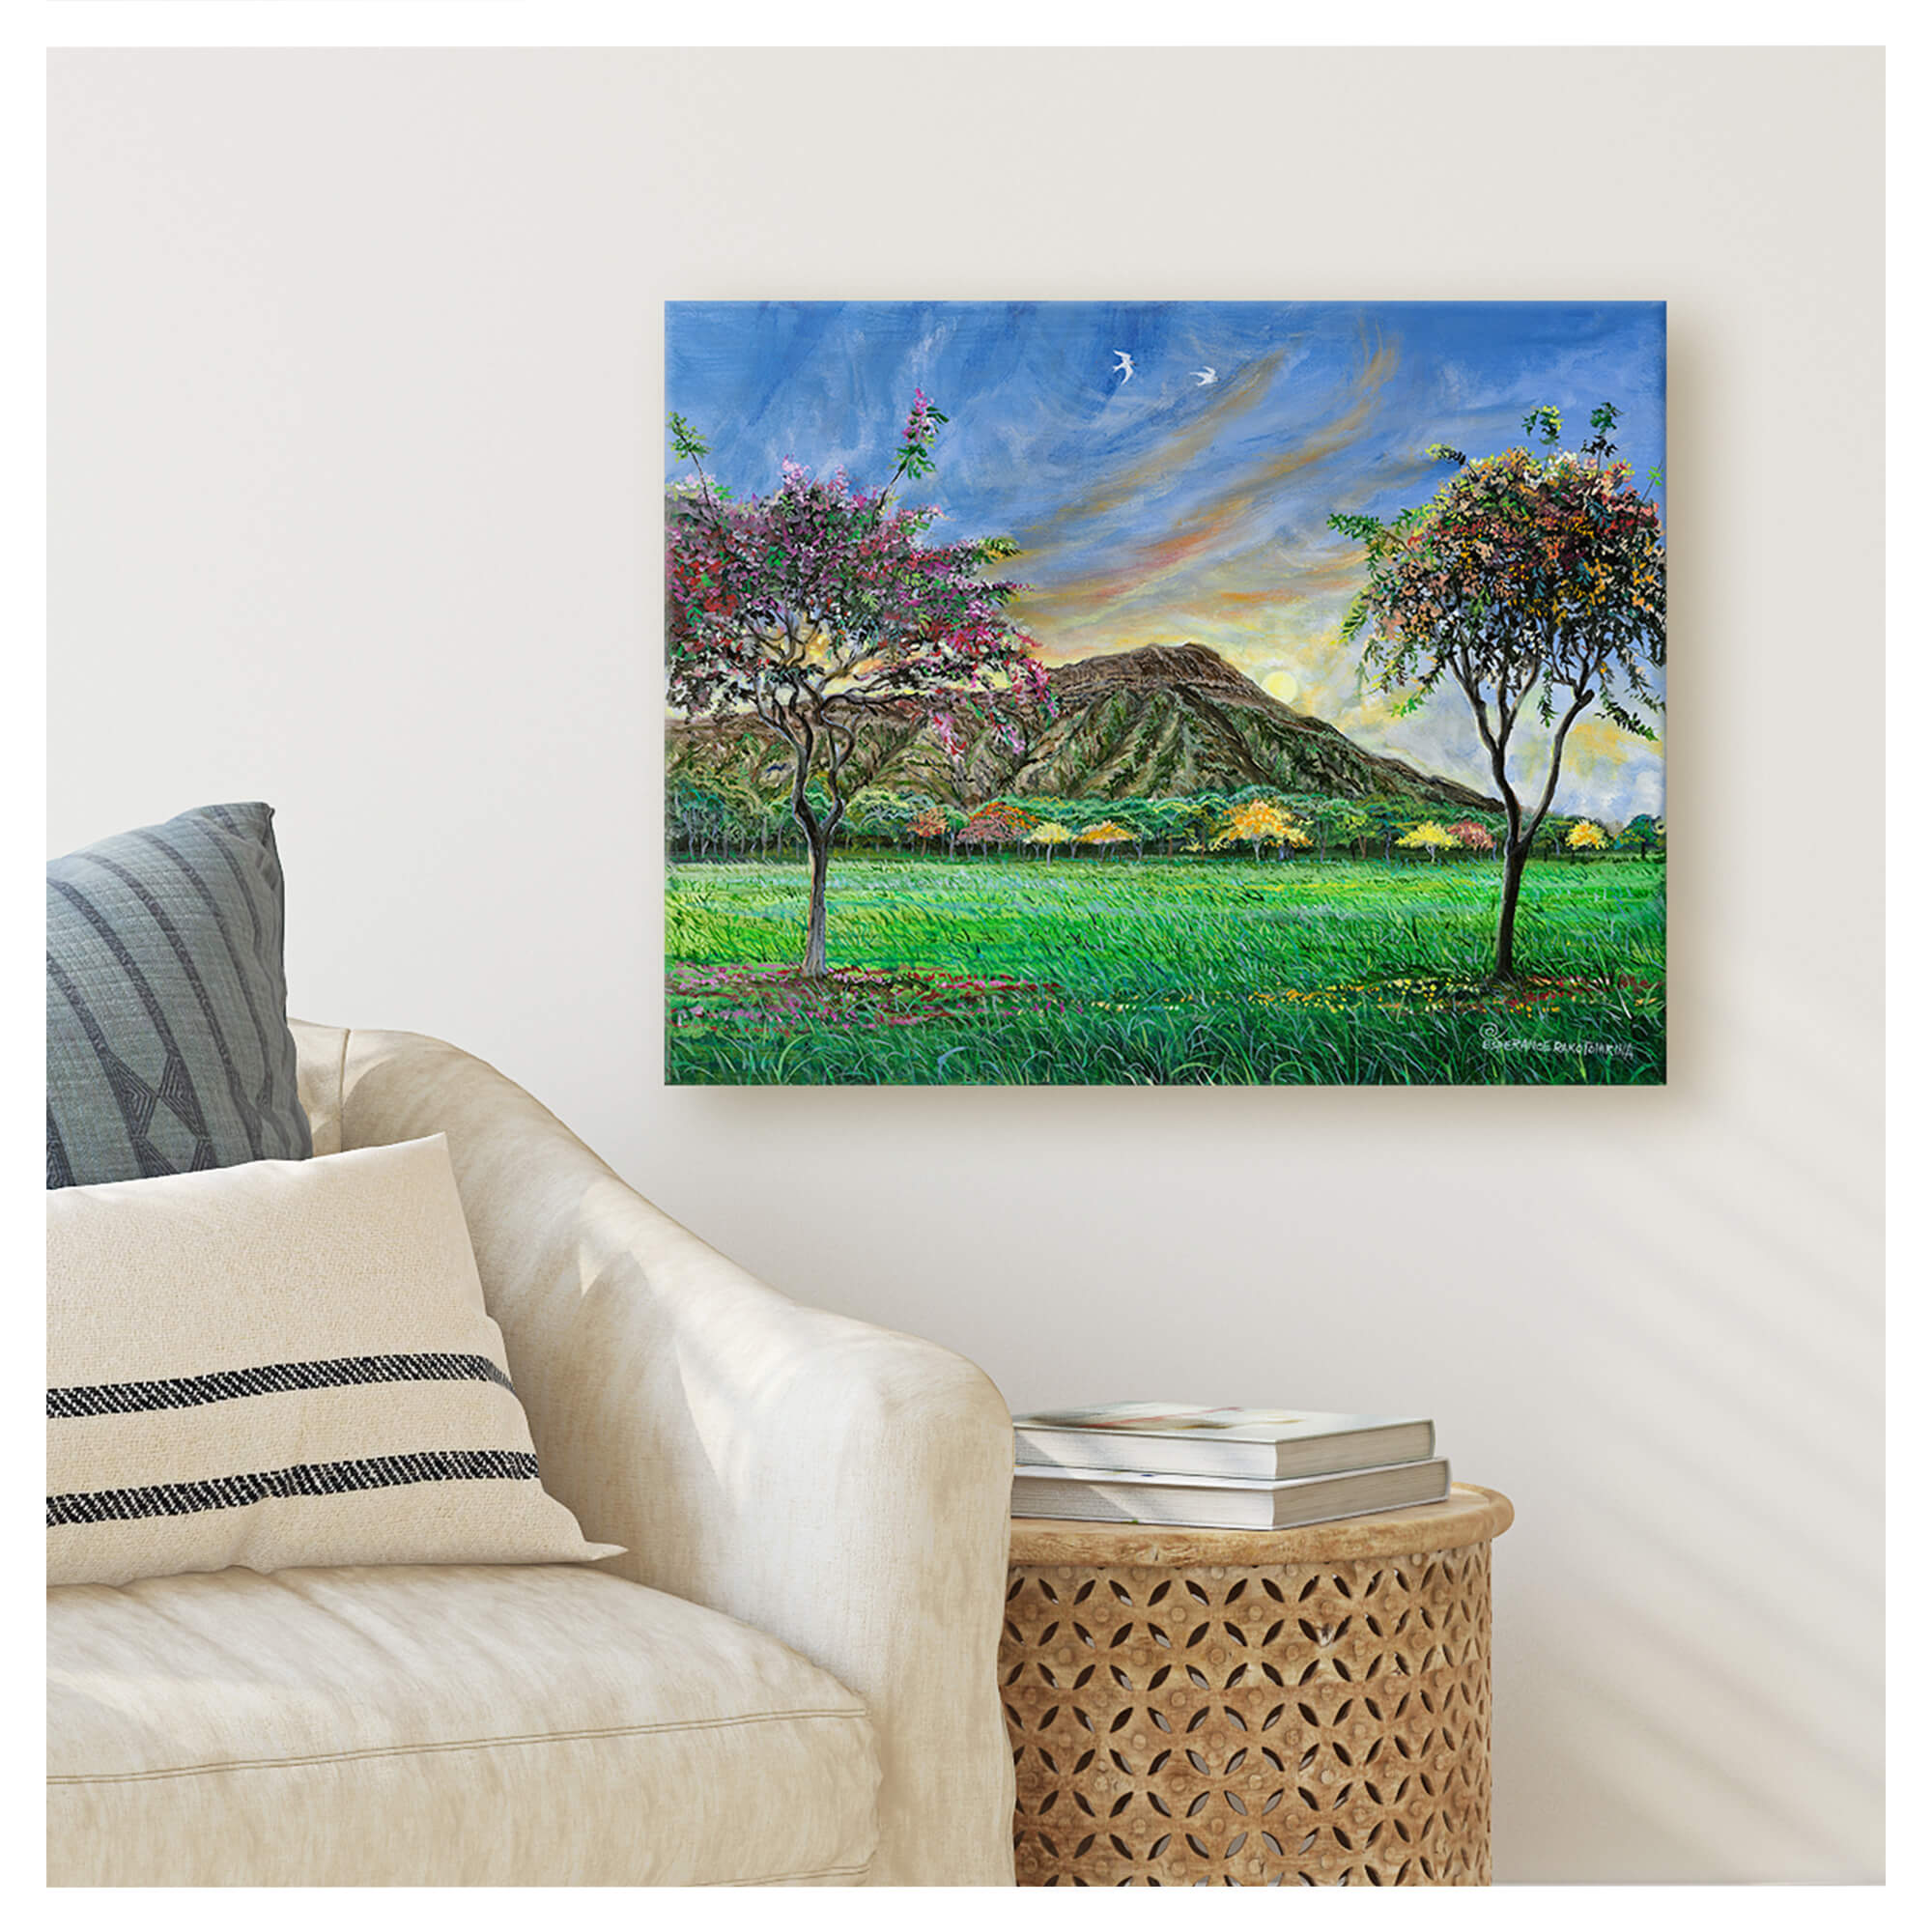 Canvas art print featuring a Sunset over mountains and trees with vibrant colors by hawaii artist Esperance Rakotonirina